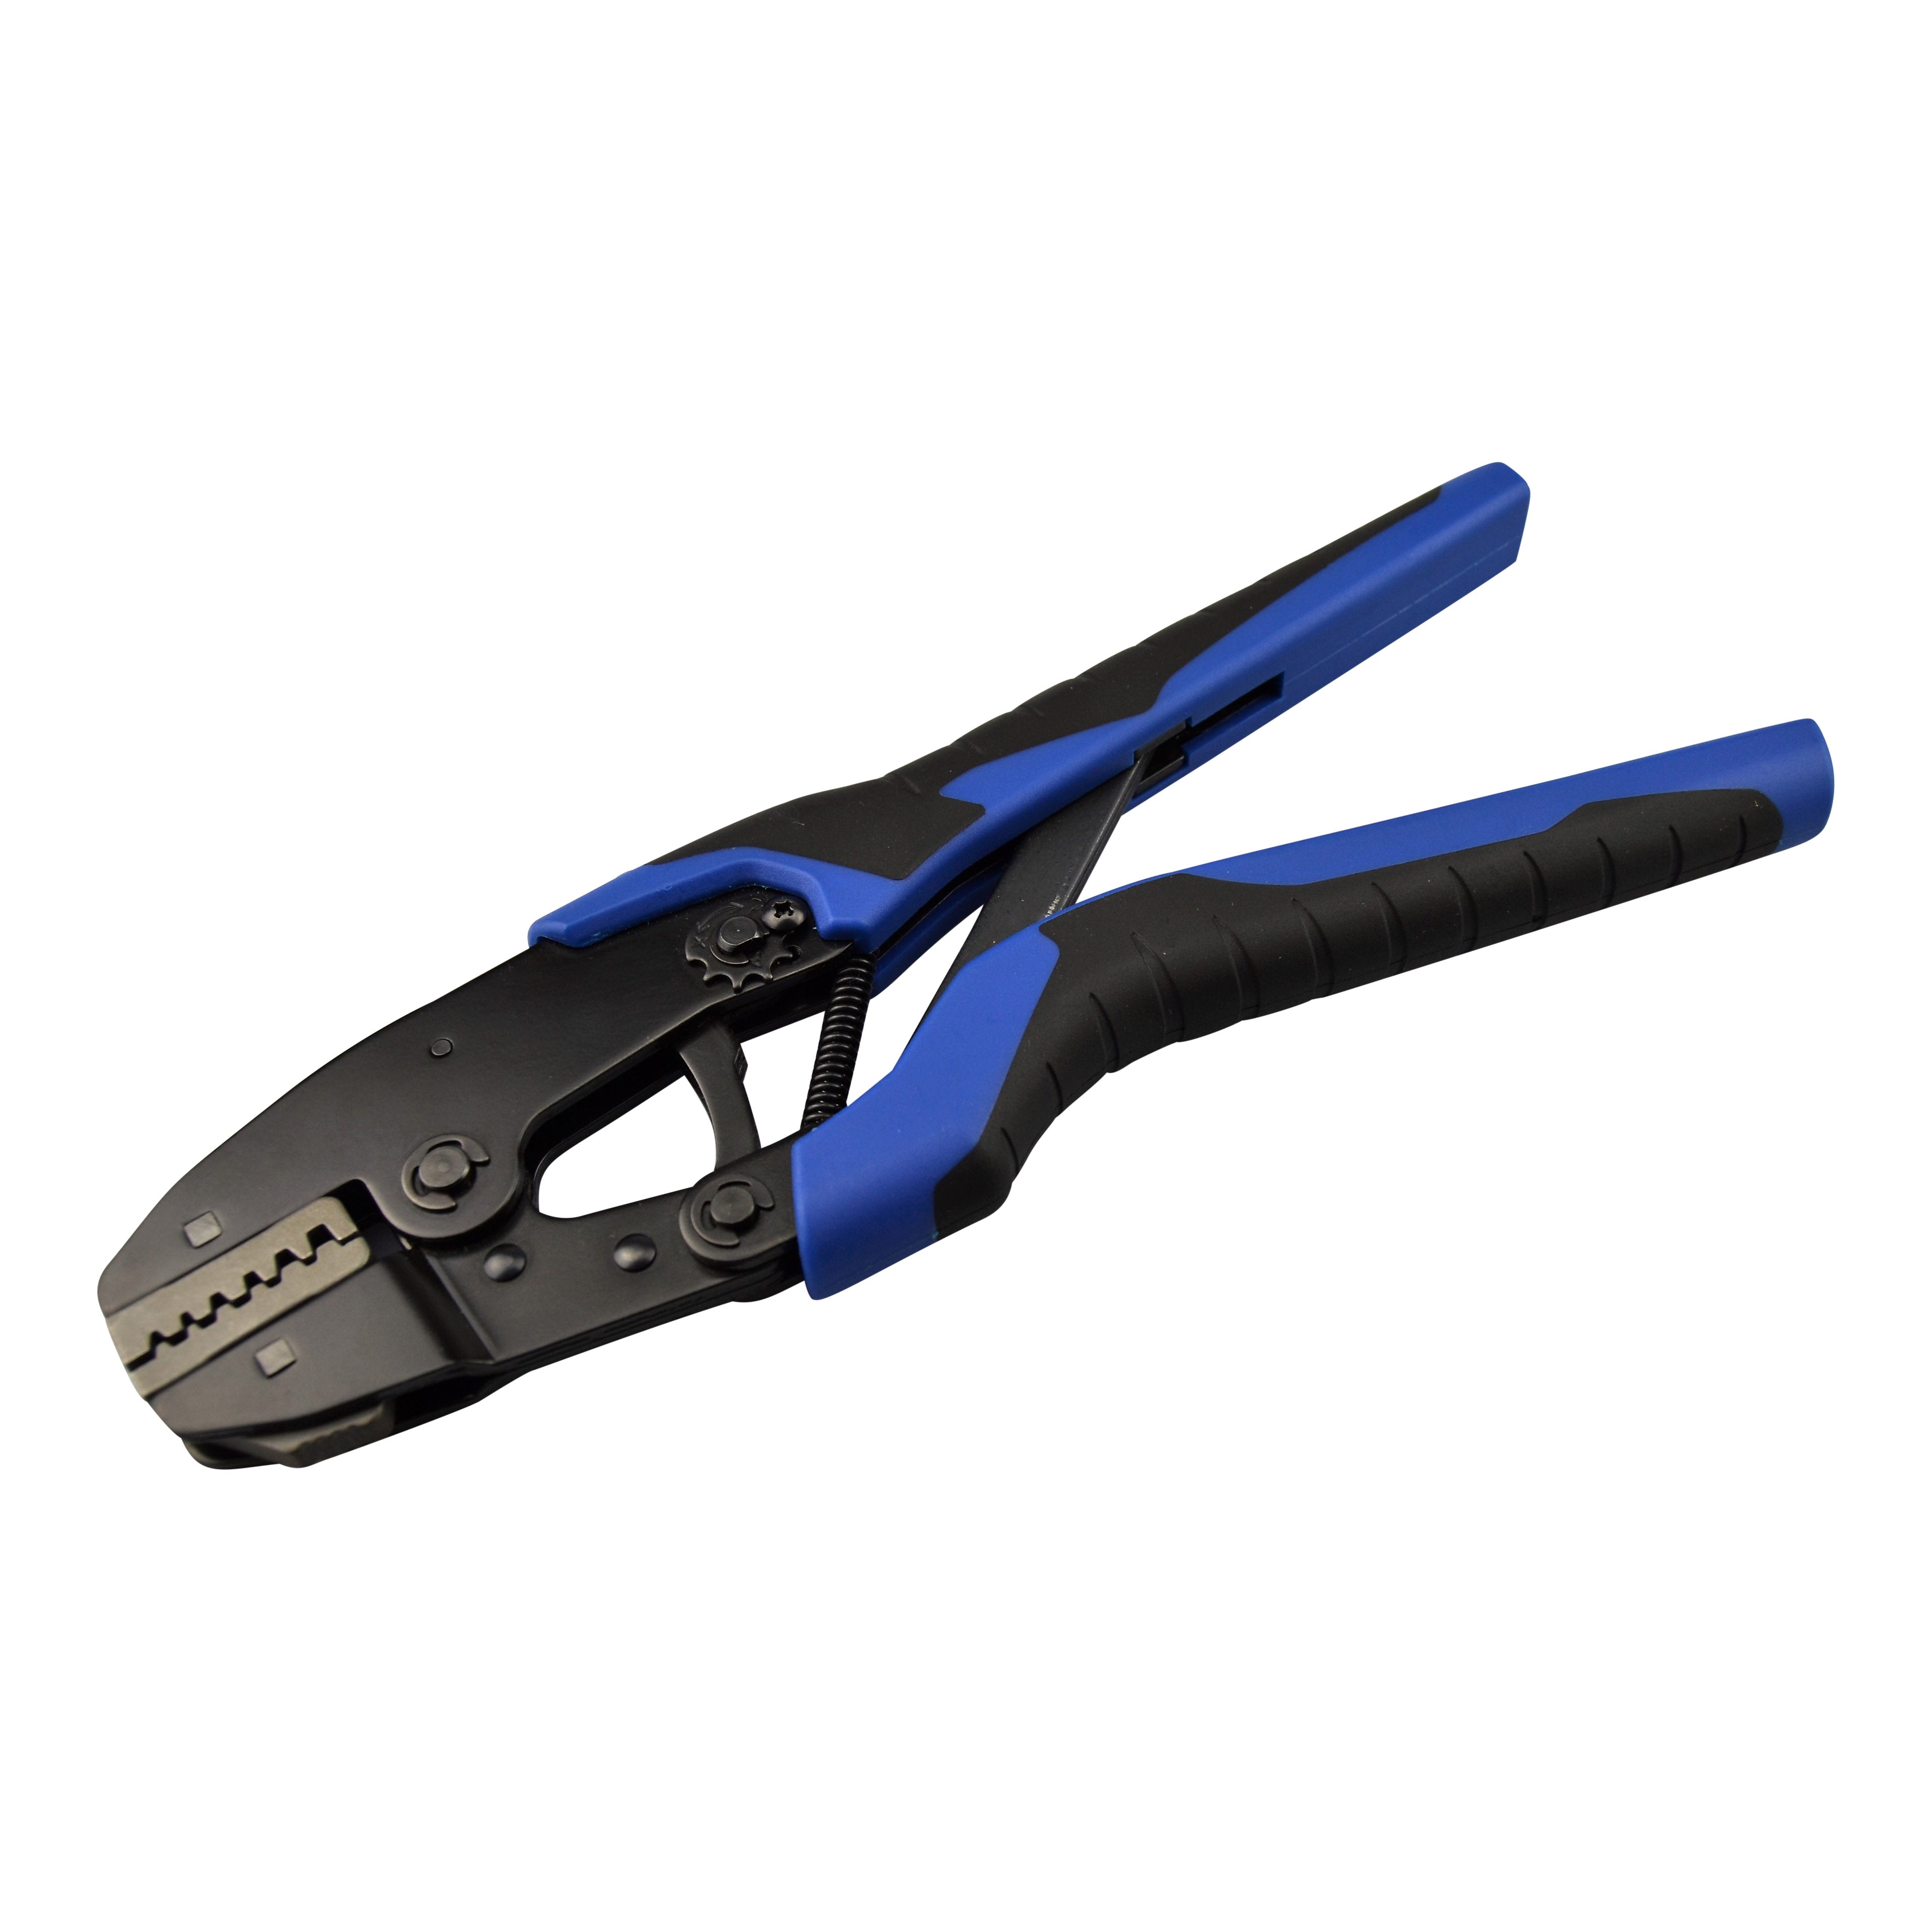 Ratchet Crimping Tool For Single, Dual Entry & Uninsulated Cord End Terminals 0.5-4mm²